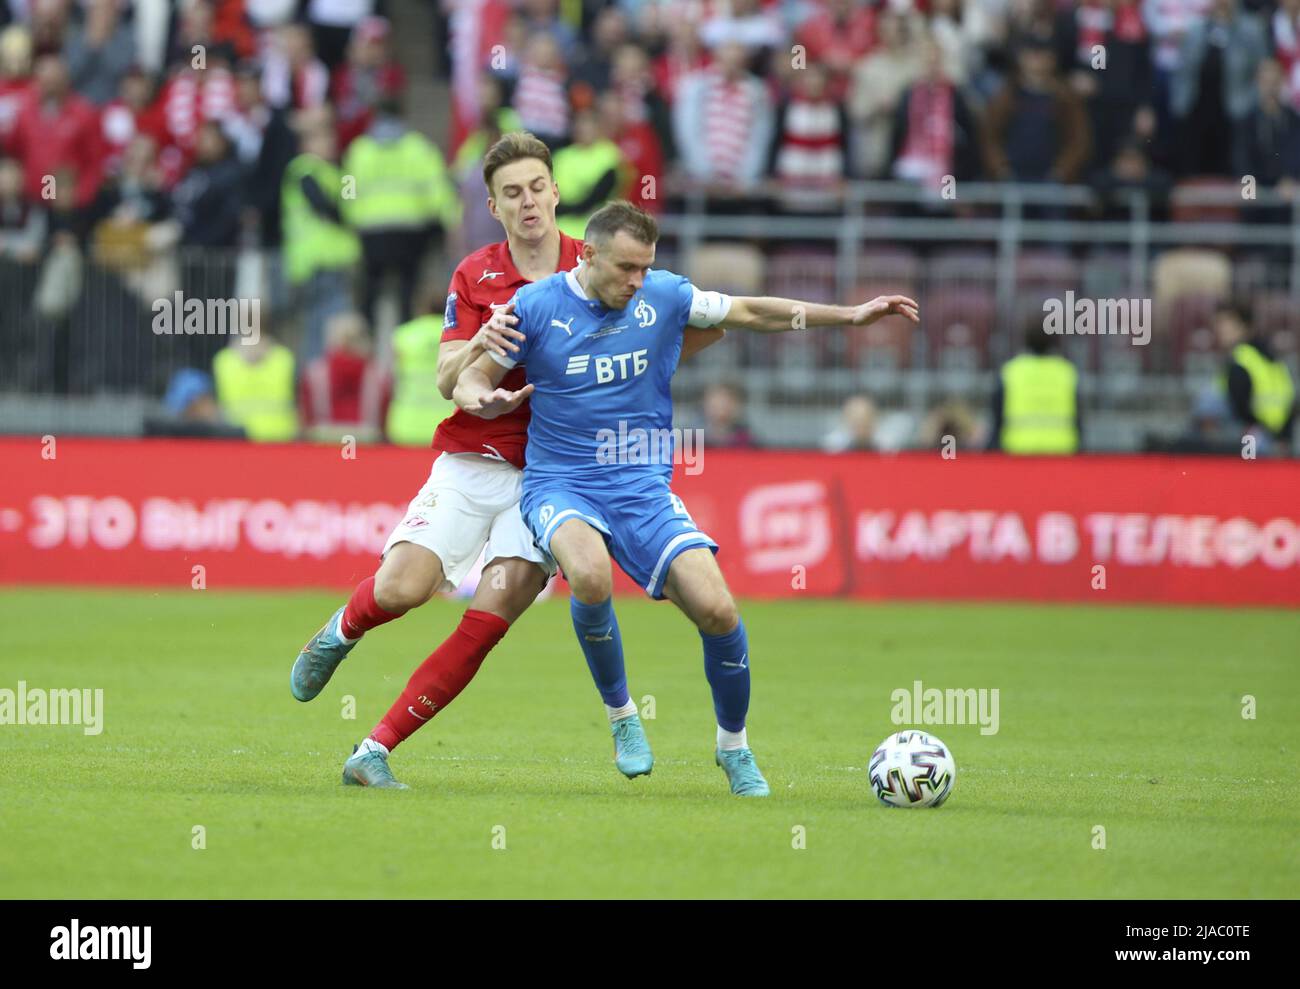 MOSCOW, RUSSIA, OCTOBER 20, 2021. The 2021/22 UEFA Europa League. Football  match between Spartak (Moscow) vs Leicester City (Leicester, England) at  Otkritie Arena in Moscow. Leicester von 3:4.Photo by Stupnikov Alexander/FC  Spartak